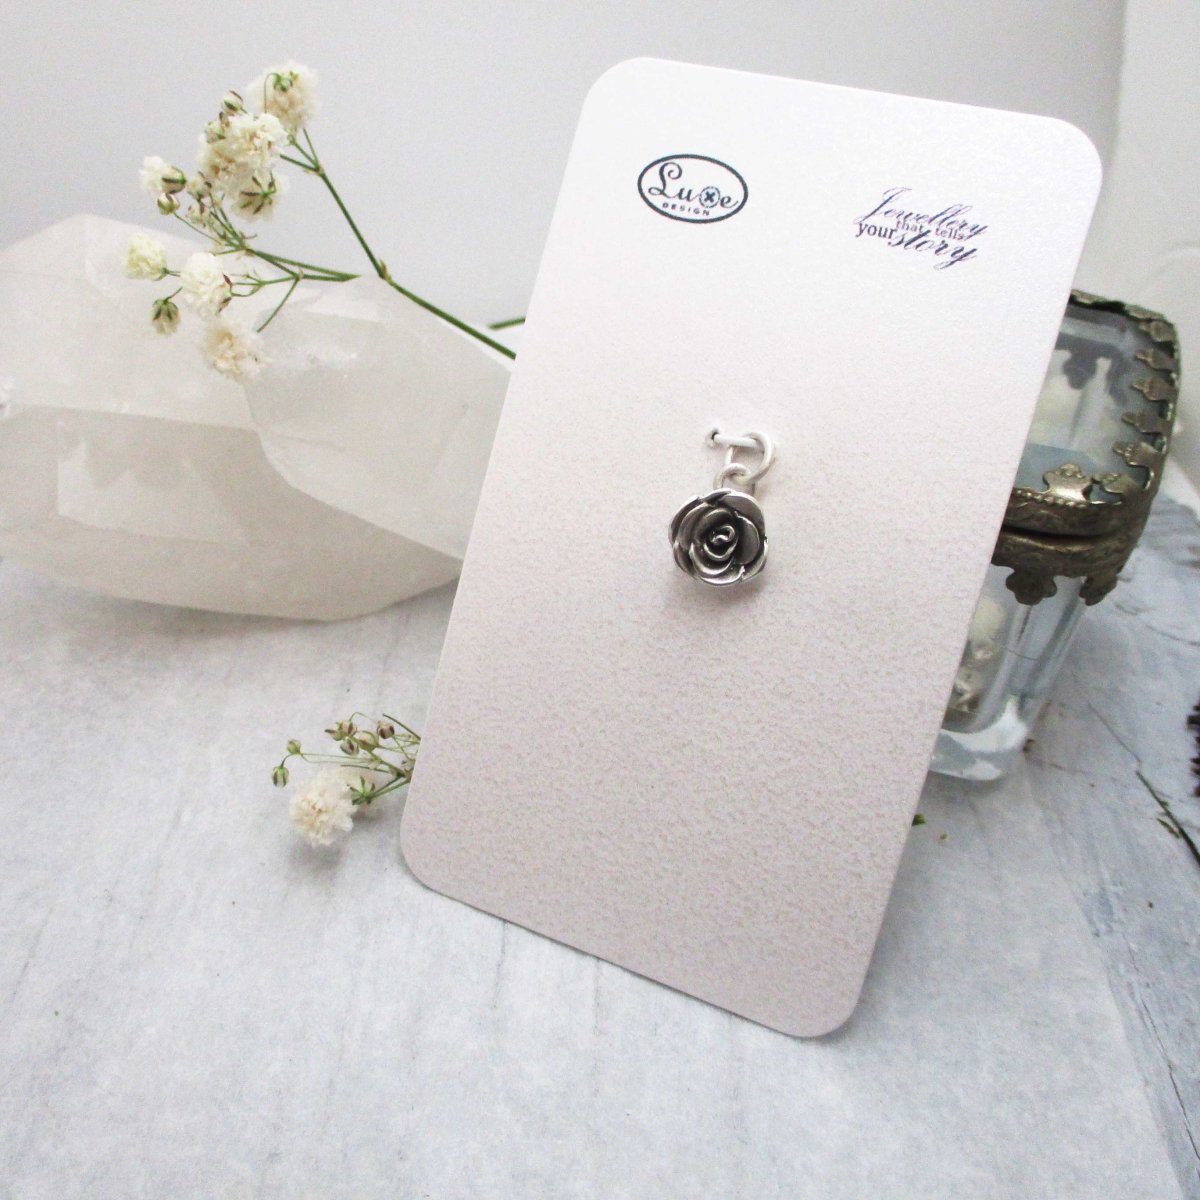 Sterling Silver Rose Charm - Luxe Design Jewellery